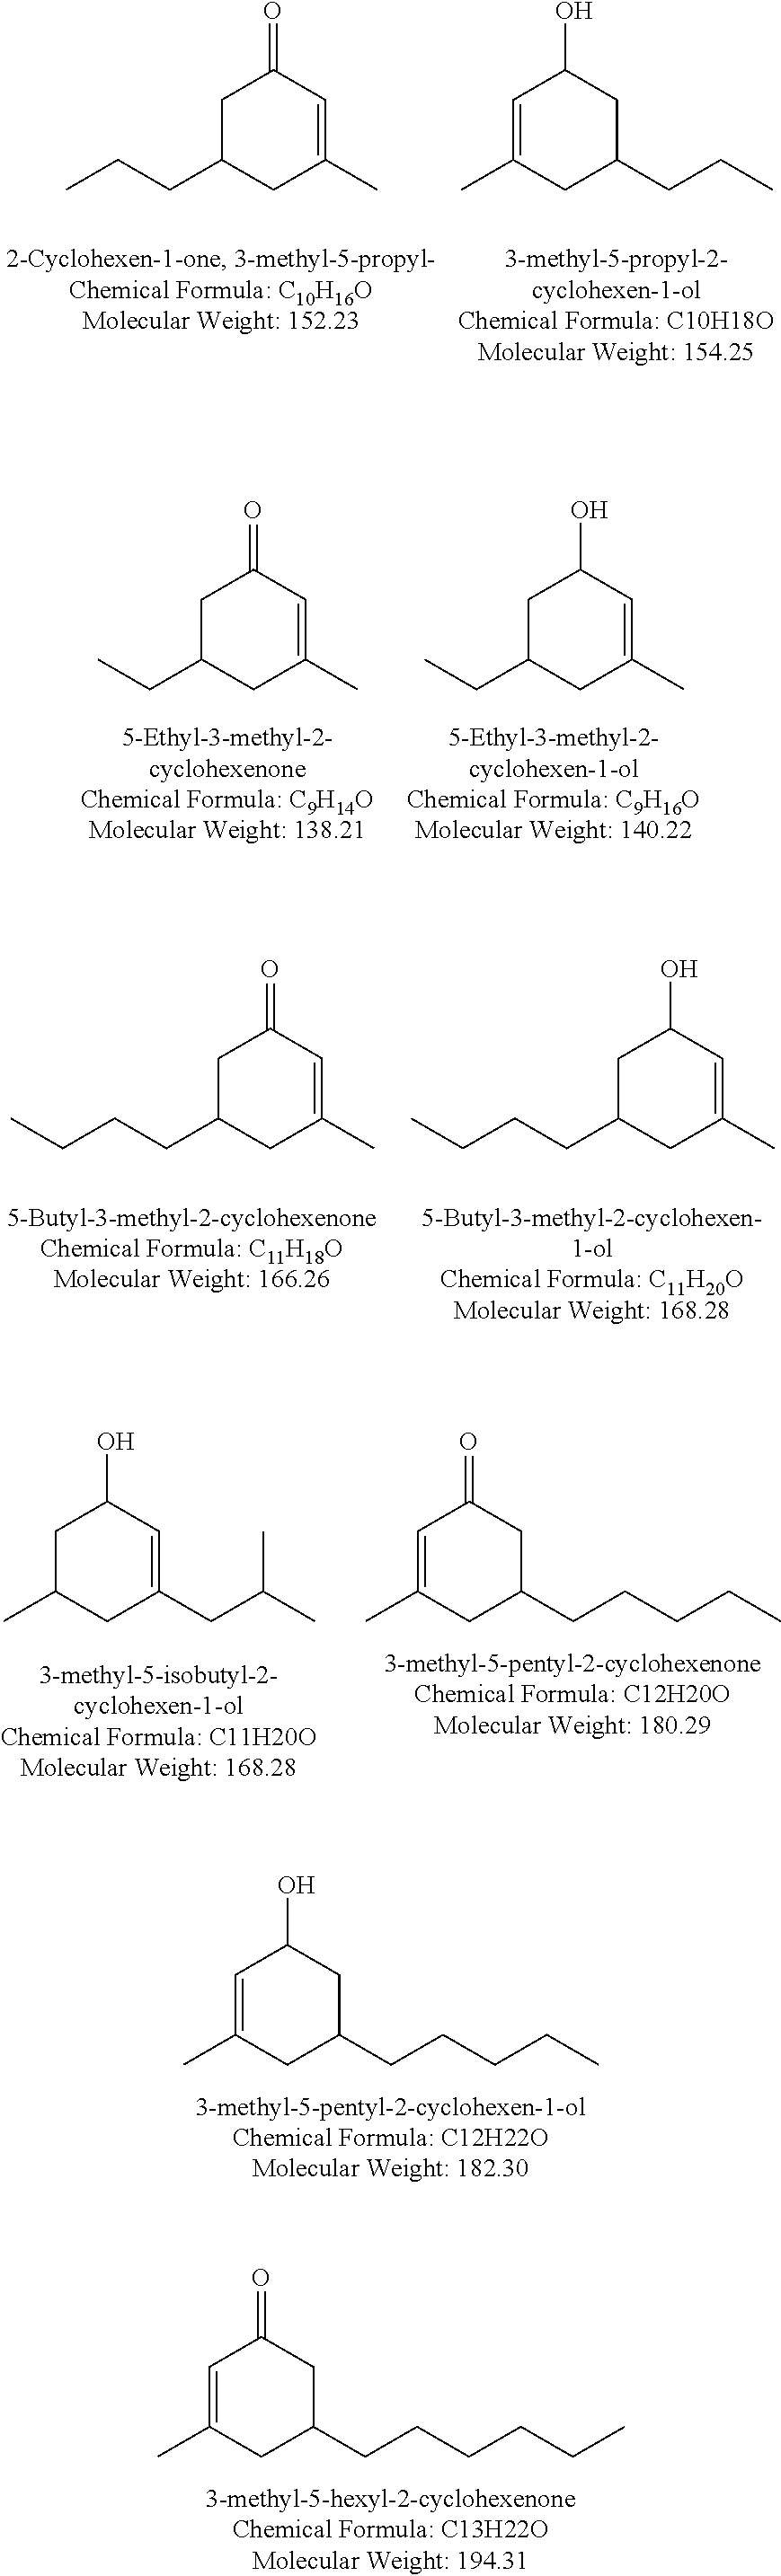 Pesticidal compositions and methods of using same